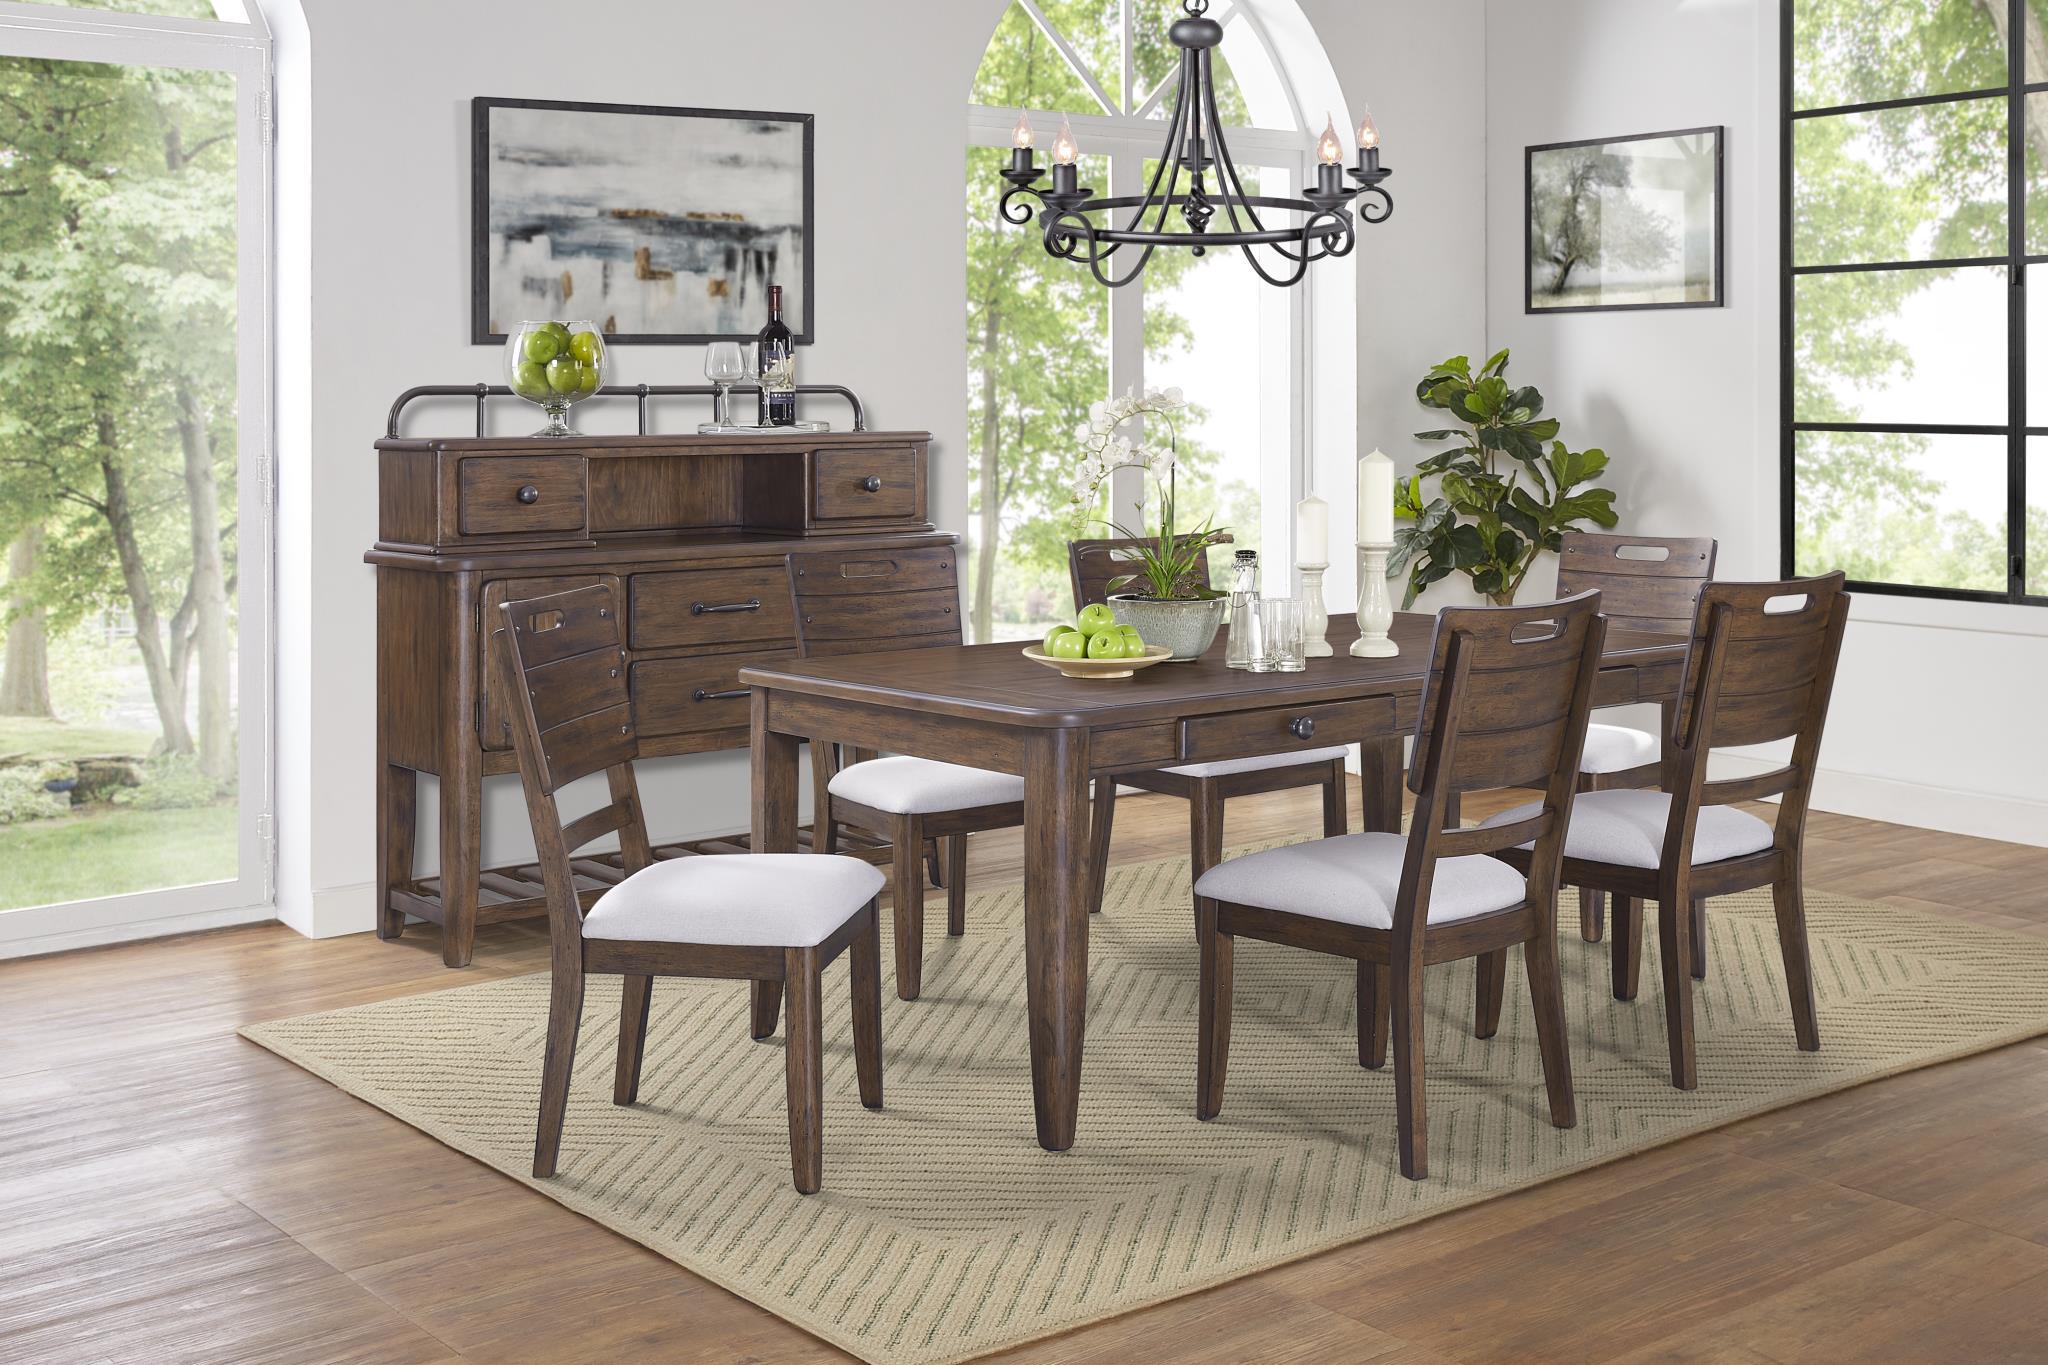 Rustic, Cottage, Farmhouse Dining Chair Set DANVILLE 315-510 315-510 in Brown Fabric